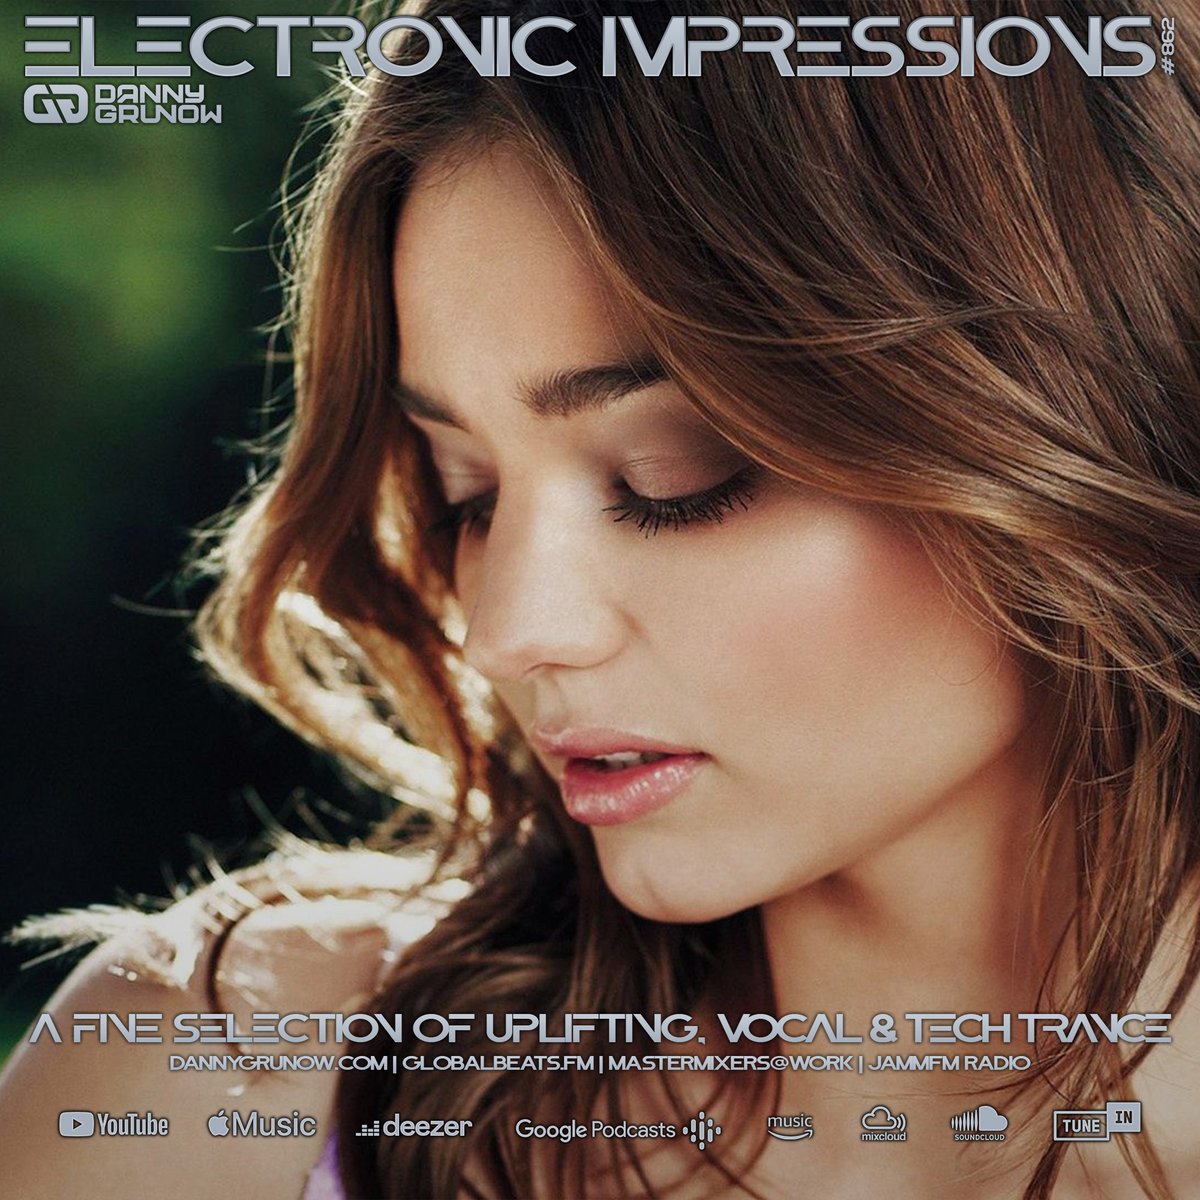 Happy Sunday #Trancelovers

Back with a massive new episode of Electronic Impressions today, premiering on Youtube at 6PM CET: youtu.be/4krYafPUO7c

Hope you'll tune in, enjoy the music.

#Trance #UpliftingTrance #VocalTrance #TechTrance #Radioshow #Podcast